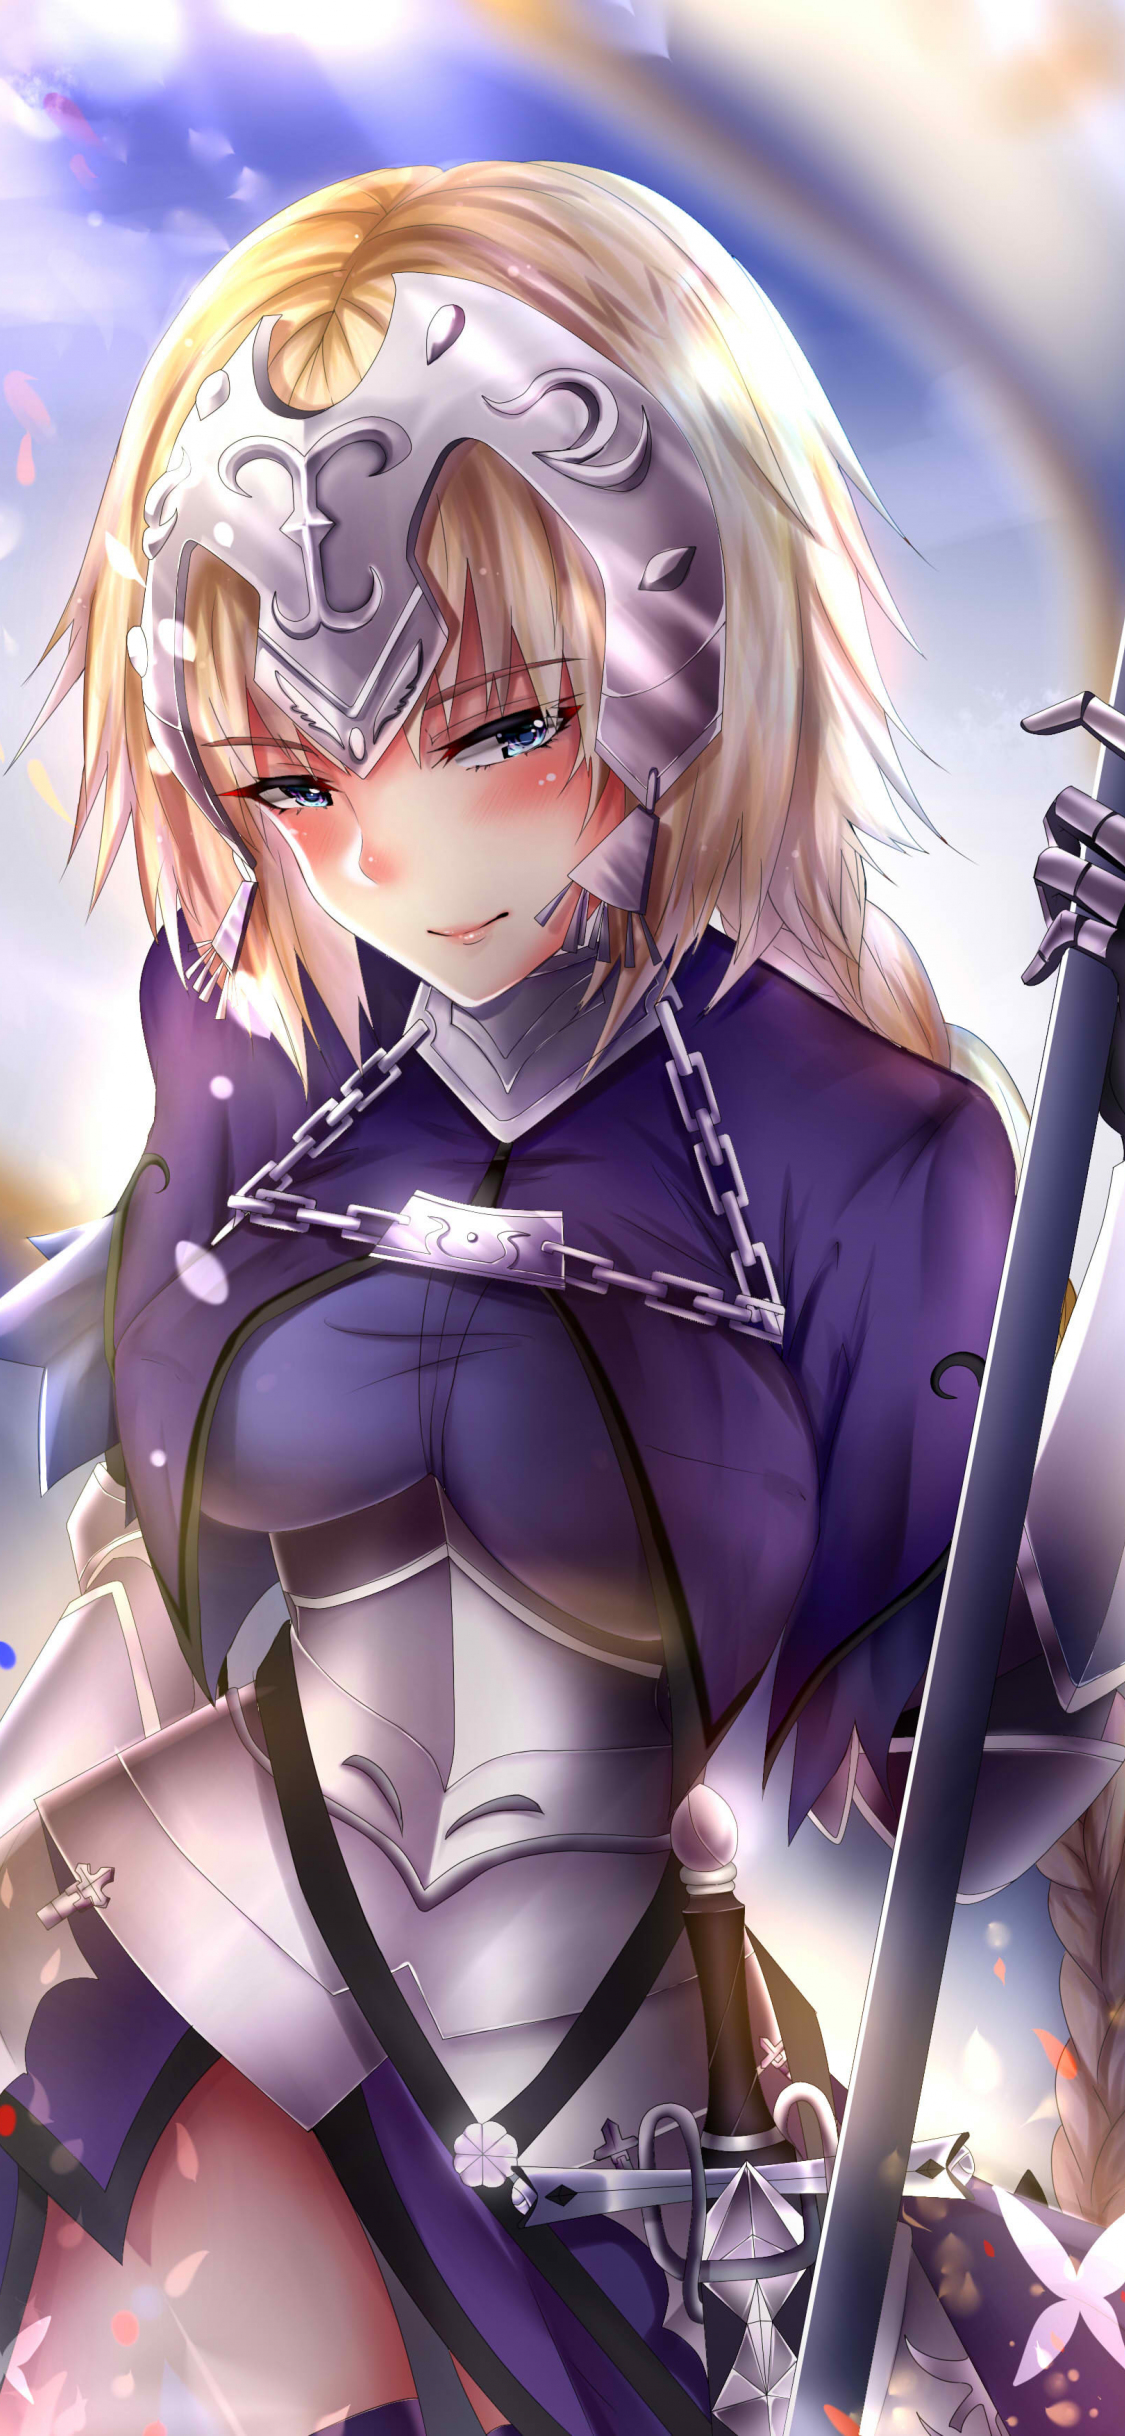 Download Beautiful Jeanne D Arc Fate Stay Night 1125x2436 Wallpaper Iphone X 1125x2436 Hd Image Background 3233